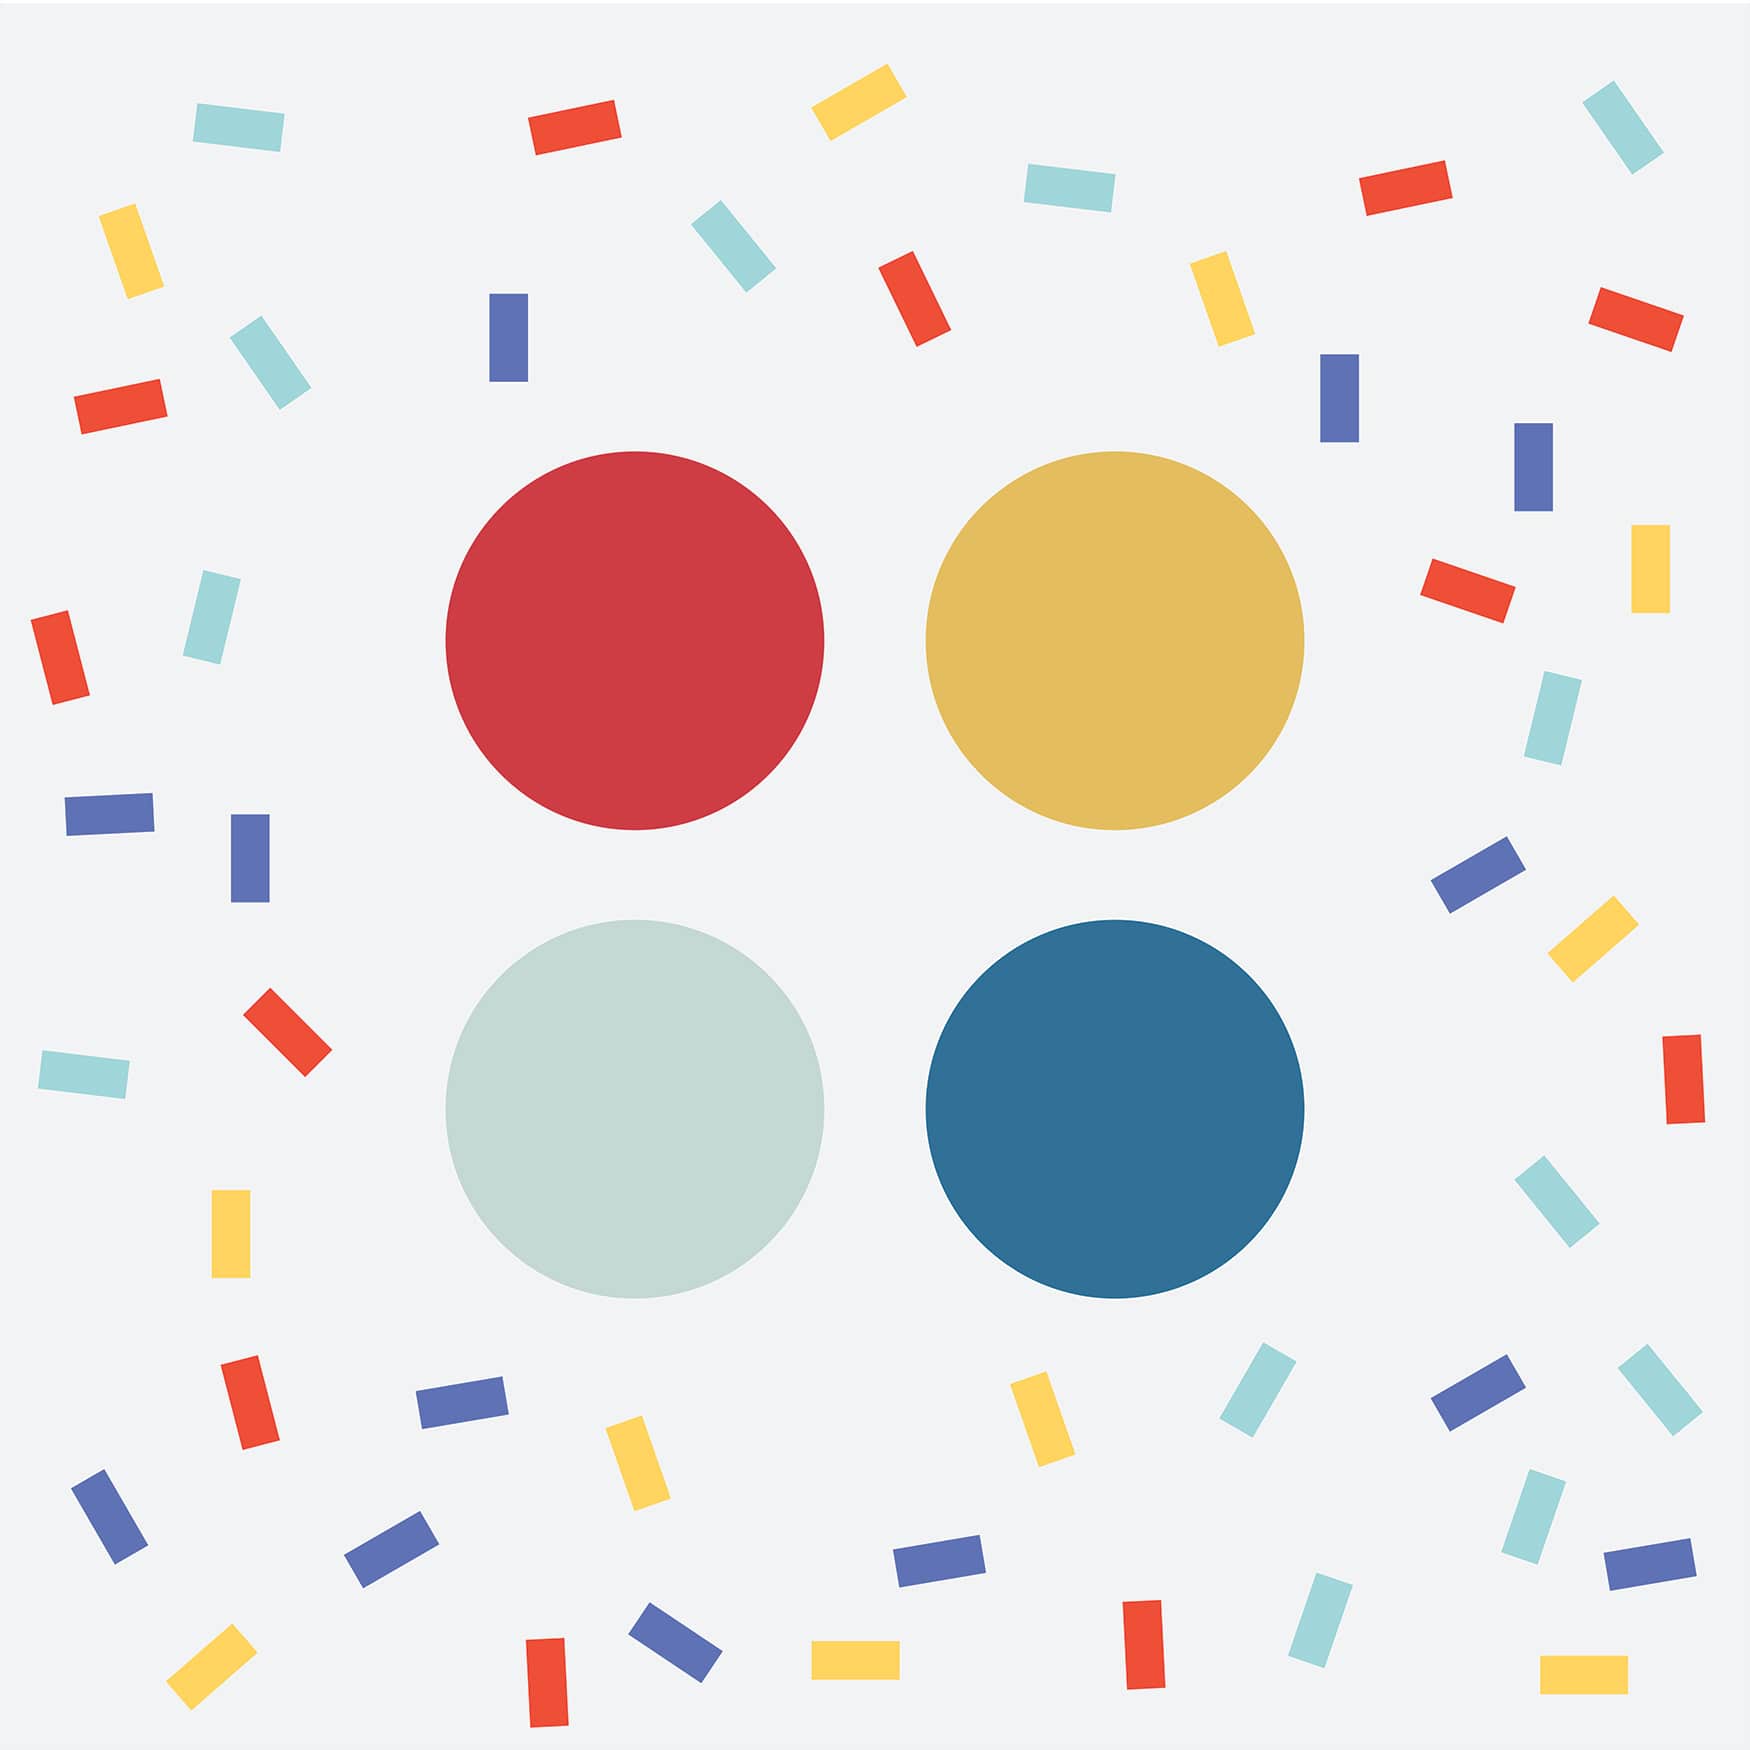 Playful color palette display with confetti surrounding the circles that represent each color.